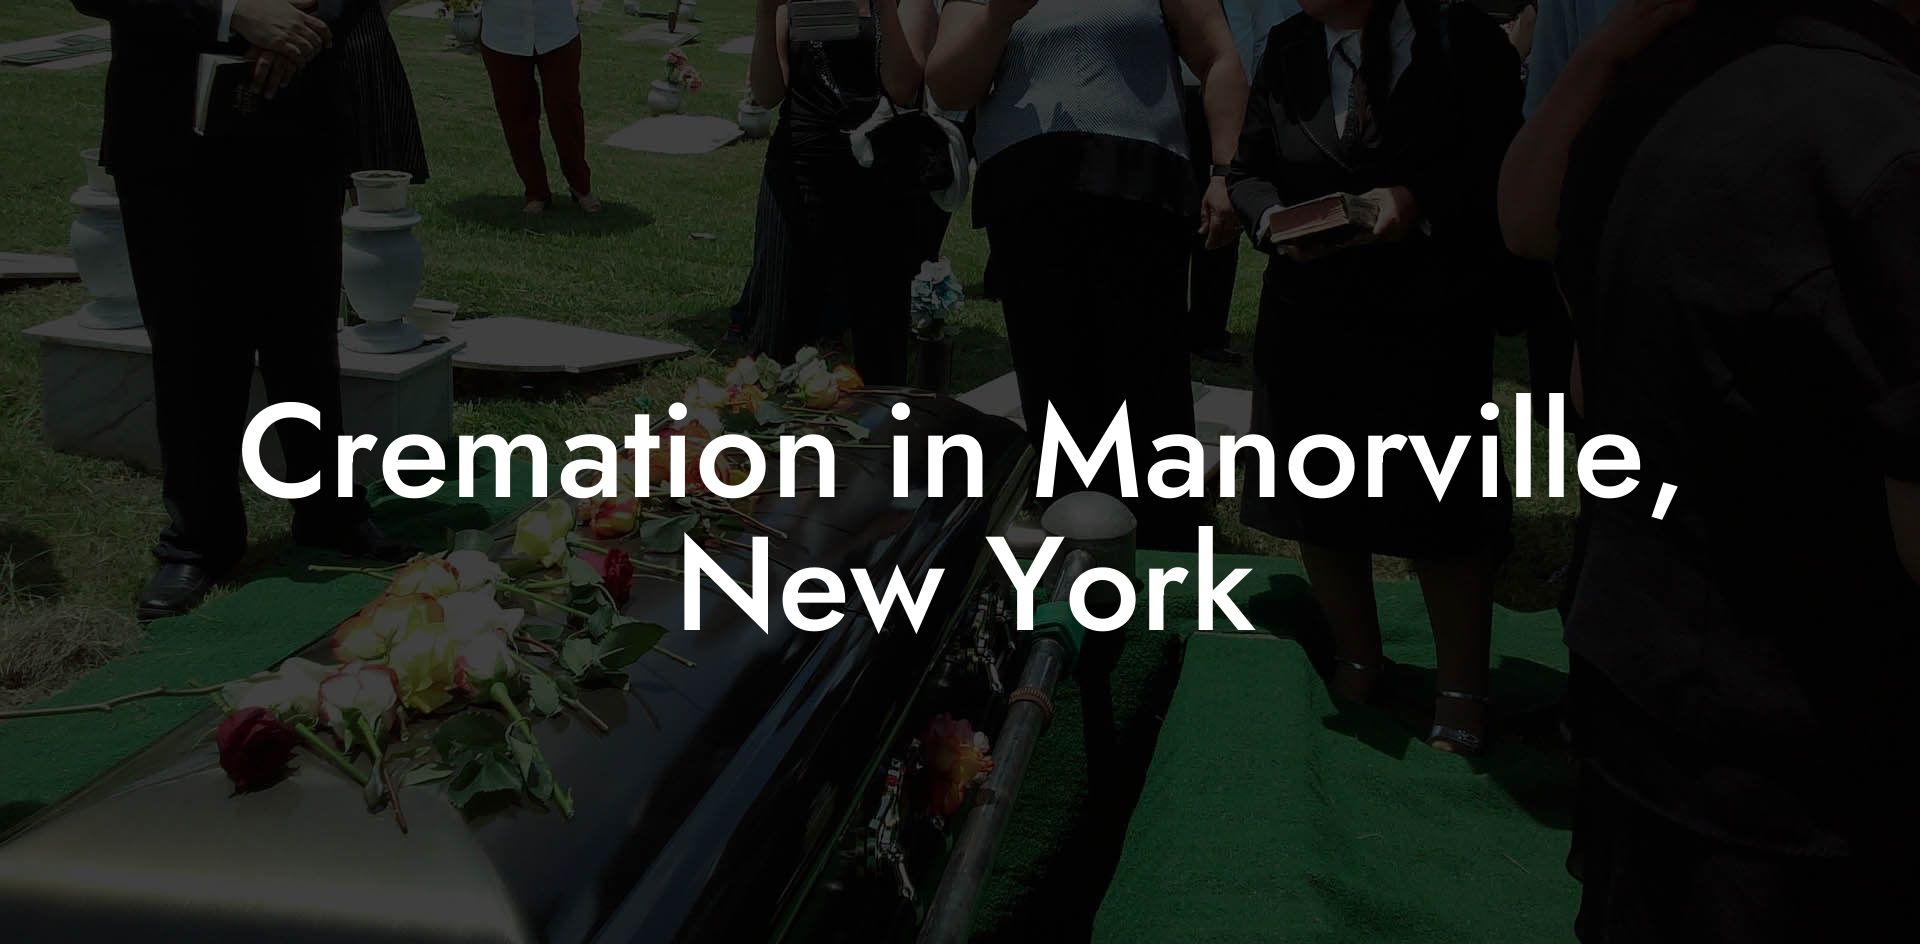 Cremation in Manorville, New York